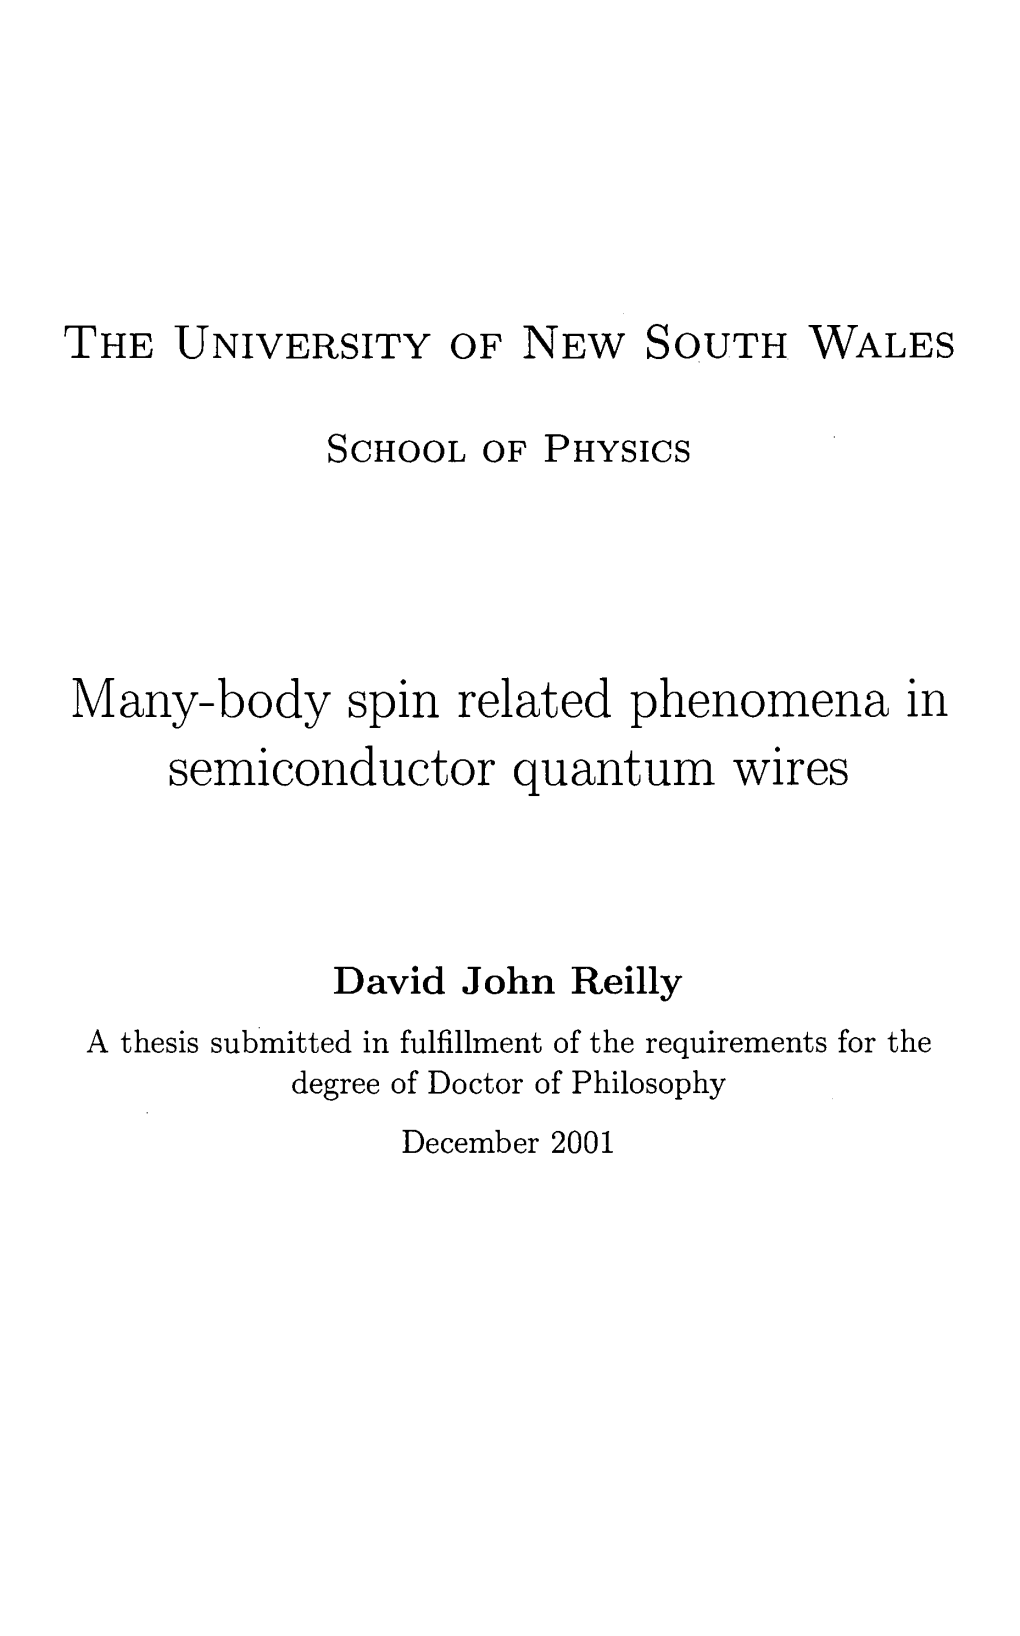 Many-Body Spin Related Phenomena in Semiconductor Quantum Wires